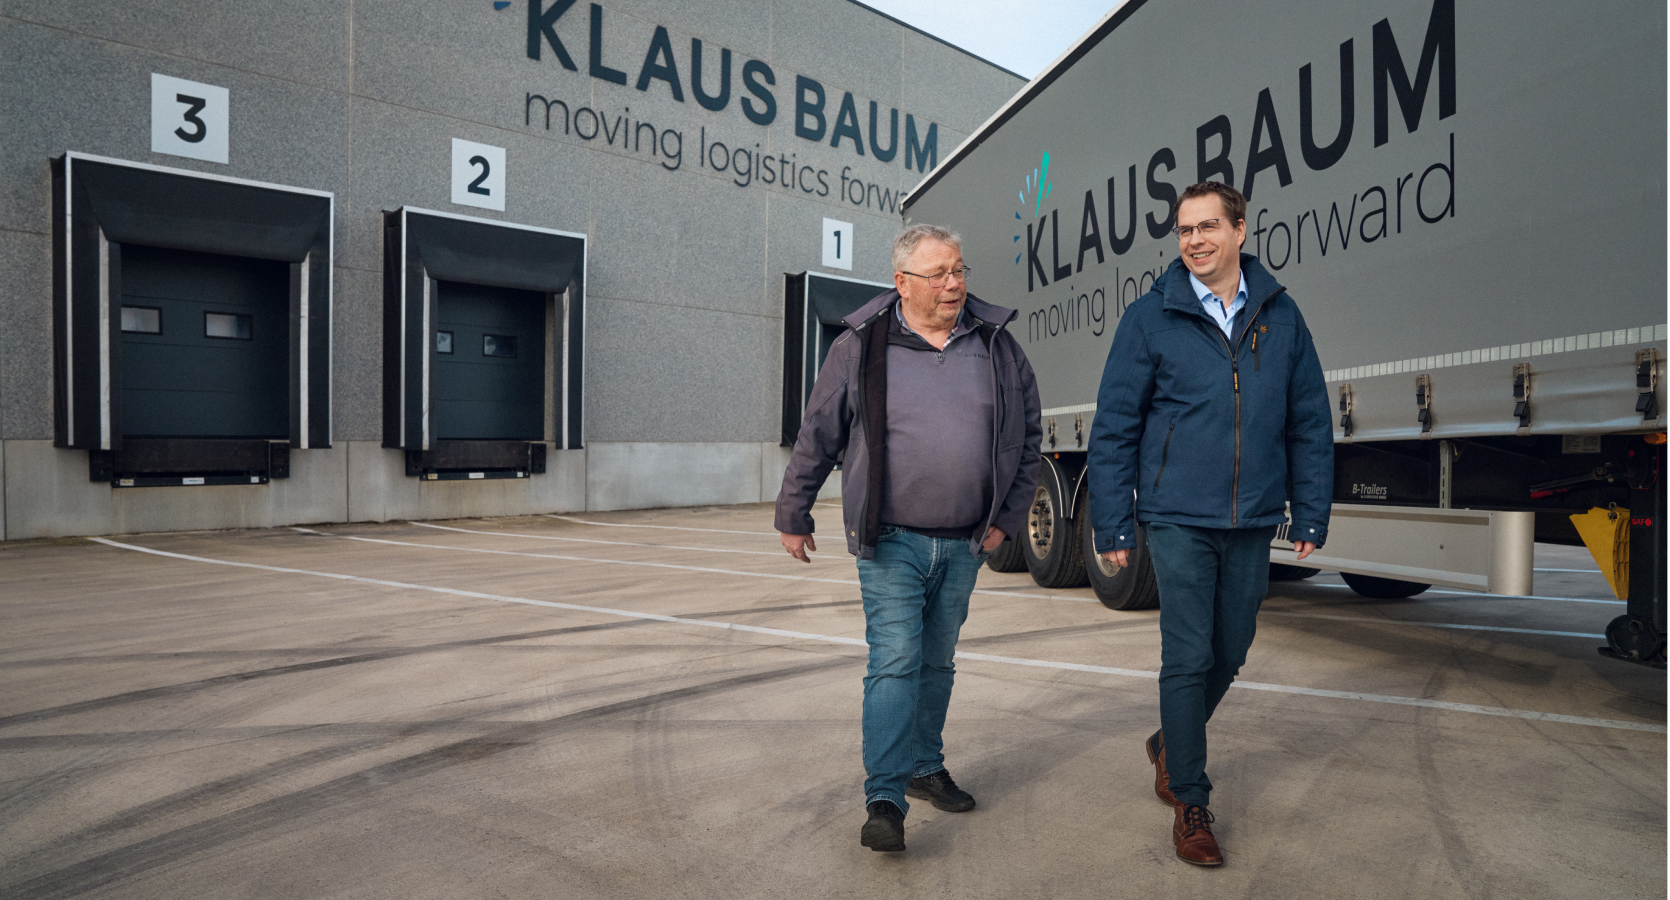 Andy Baum and his father Klaus Baum